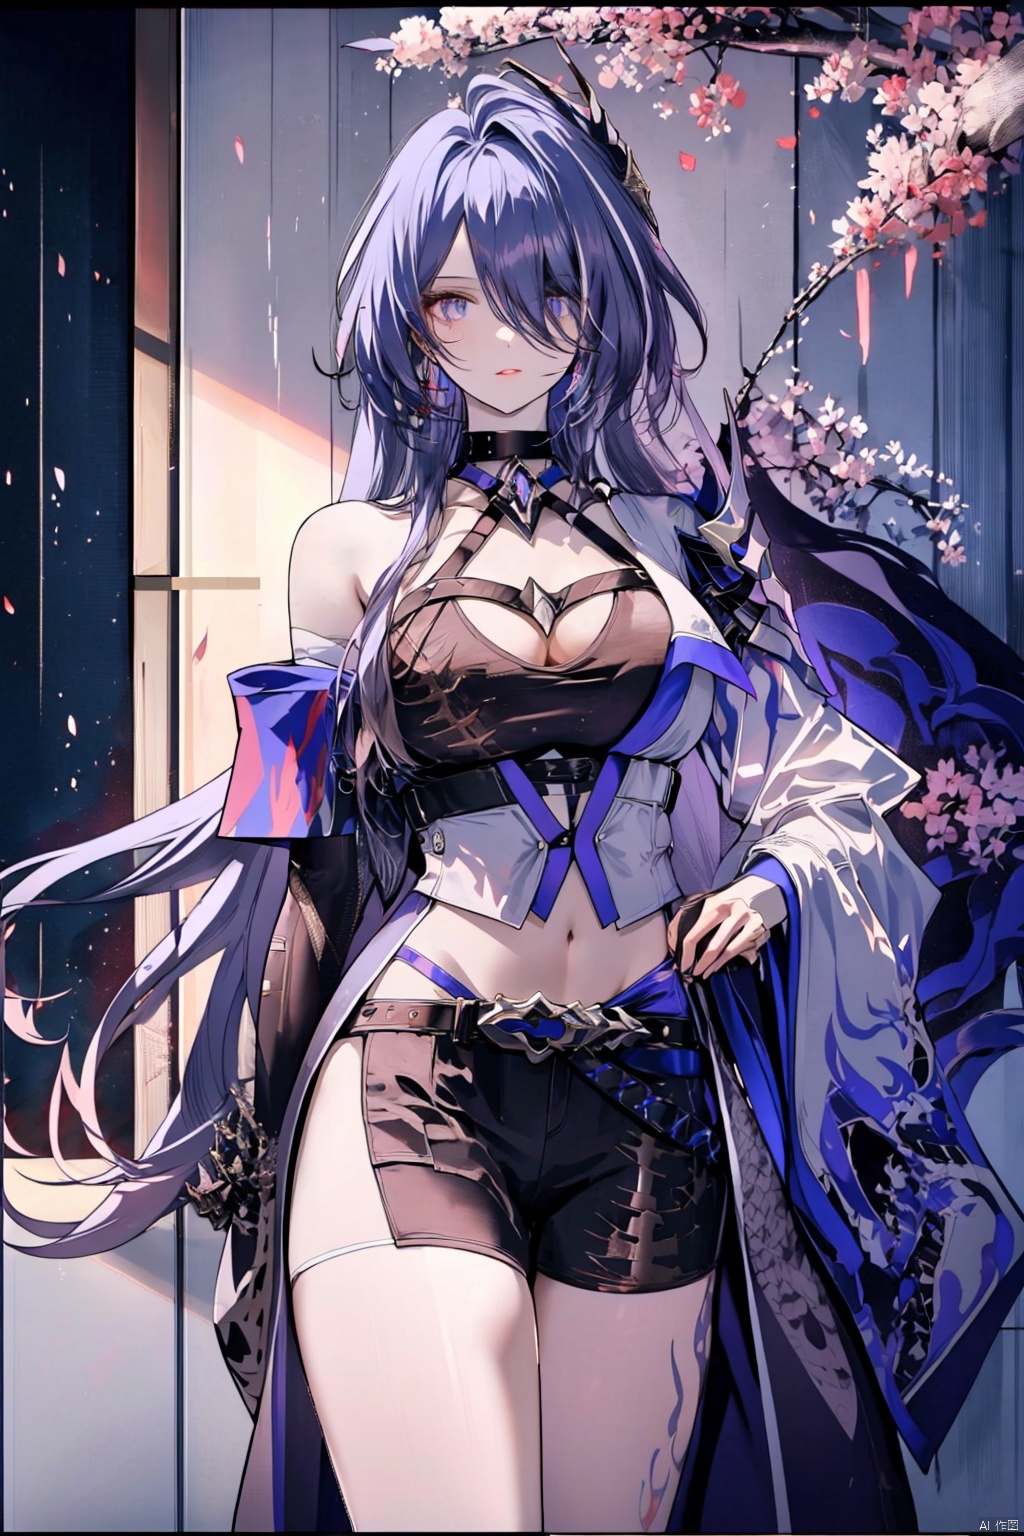  1girl, purple hair, dark purple hair, purple clip on hair, wearing Japanese clothes, Japanese clothes, purple and white Japanese clothes, holding a sword, holding a purple shiny sword, glowing purple sword, Japanese type sword, background charry blossom trees, beautiful pinkish charry blossom trees, dark purple sky, look at the view, lora:more_details:0.5, vibrant colors, masterpiece, sharp focus, best quality, depth of field, cinematic lighting, lora:more_details:0.5,wearing an apron, lora:more_details:0.5, naked and wearing an apron, Ymir Fritz